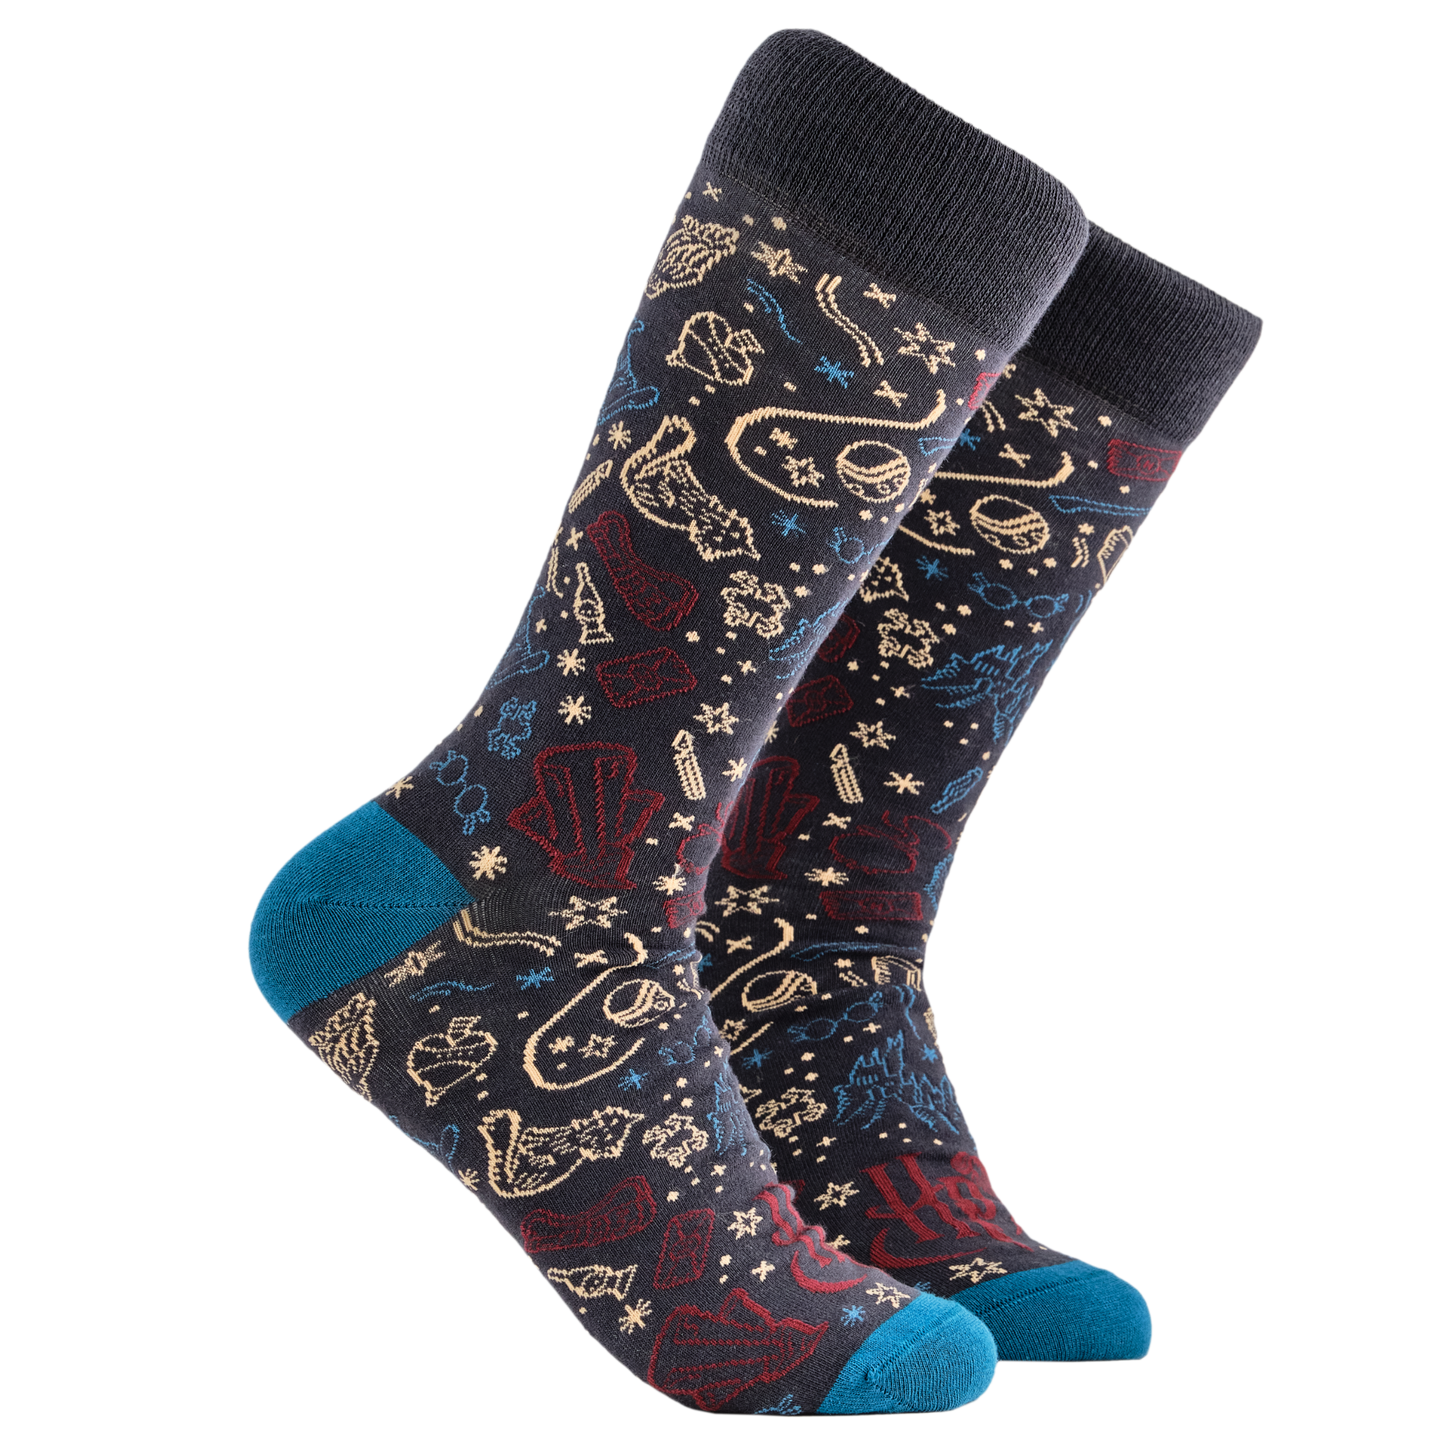 Harry Potter Socks - Wizarding World. A pair of socks depicting lots of magical elements. Grey legs, blue cuff, heel and toe.